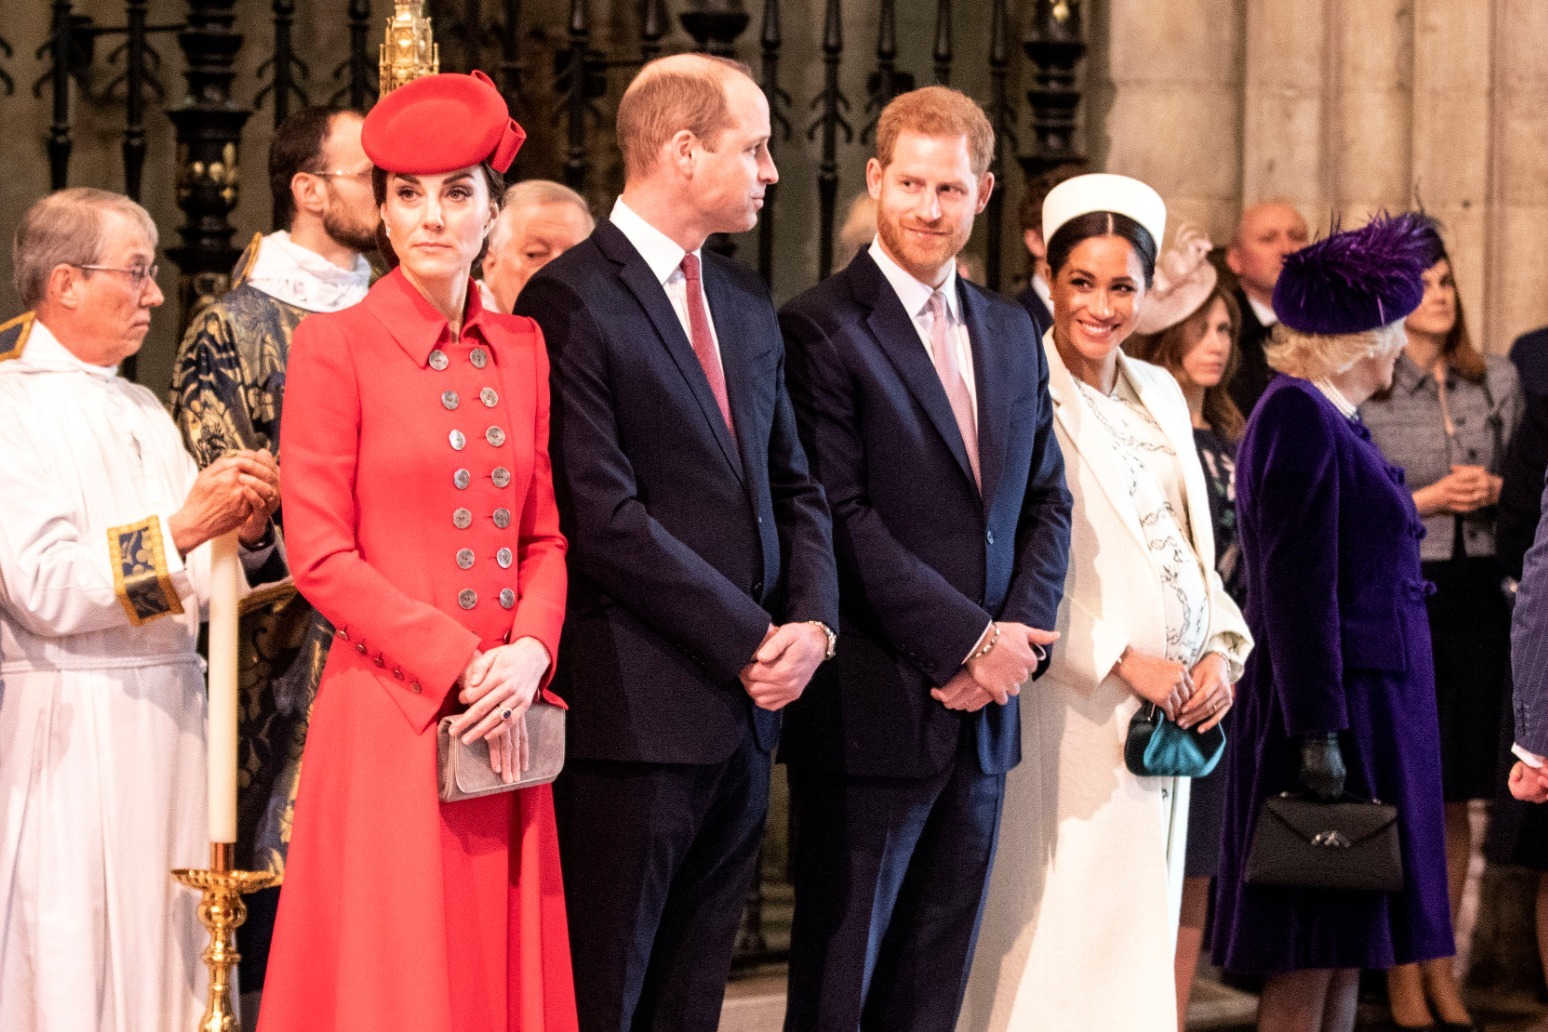 Harry and Meghan to join the Queen, William and Kate at their final official appearance 